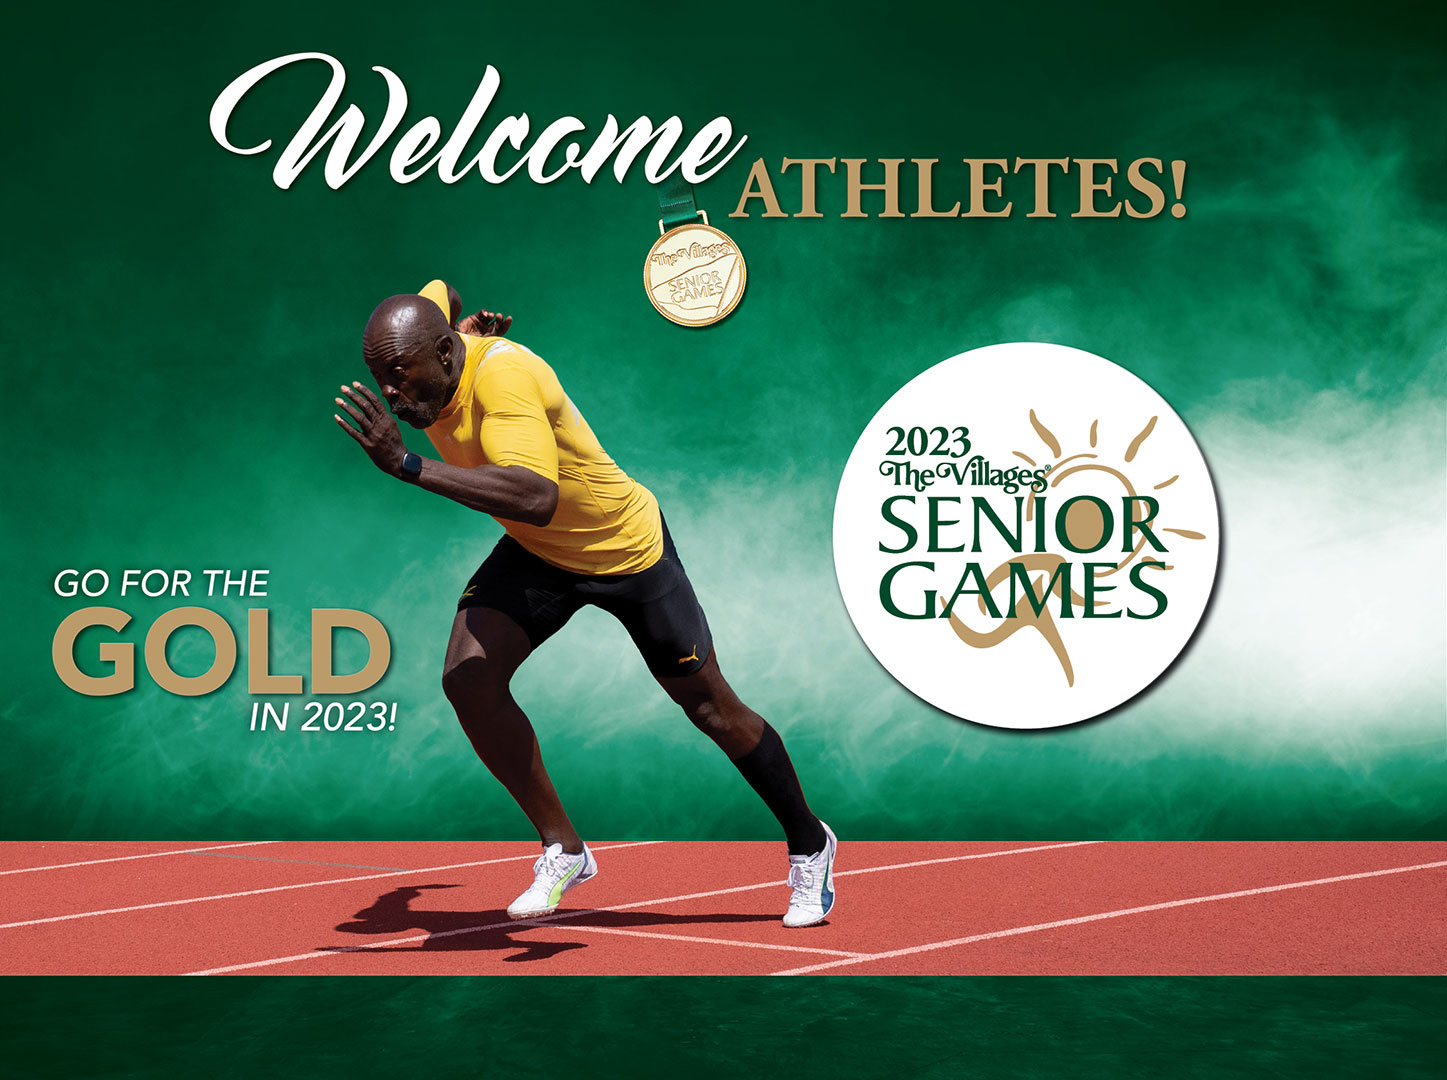 A welcome message above an athlete on a track with a go for the gold in 2023 message to the left of the athlete and The Villages senior games 2023 logo to the right